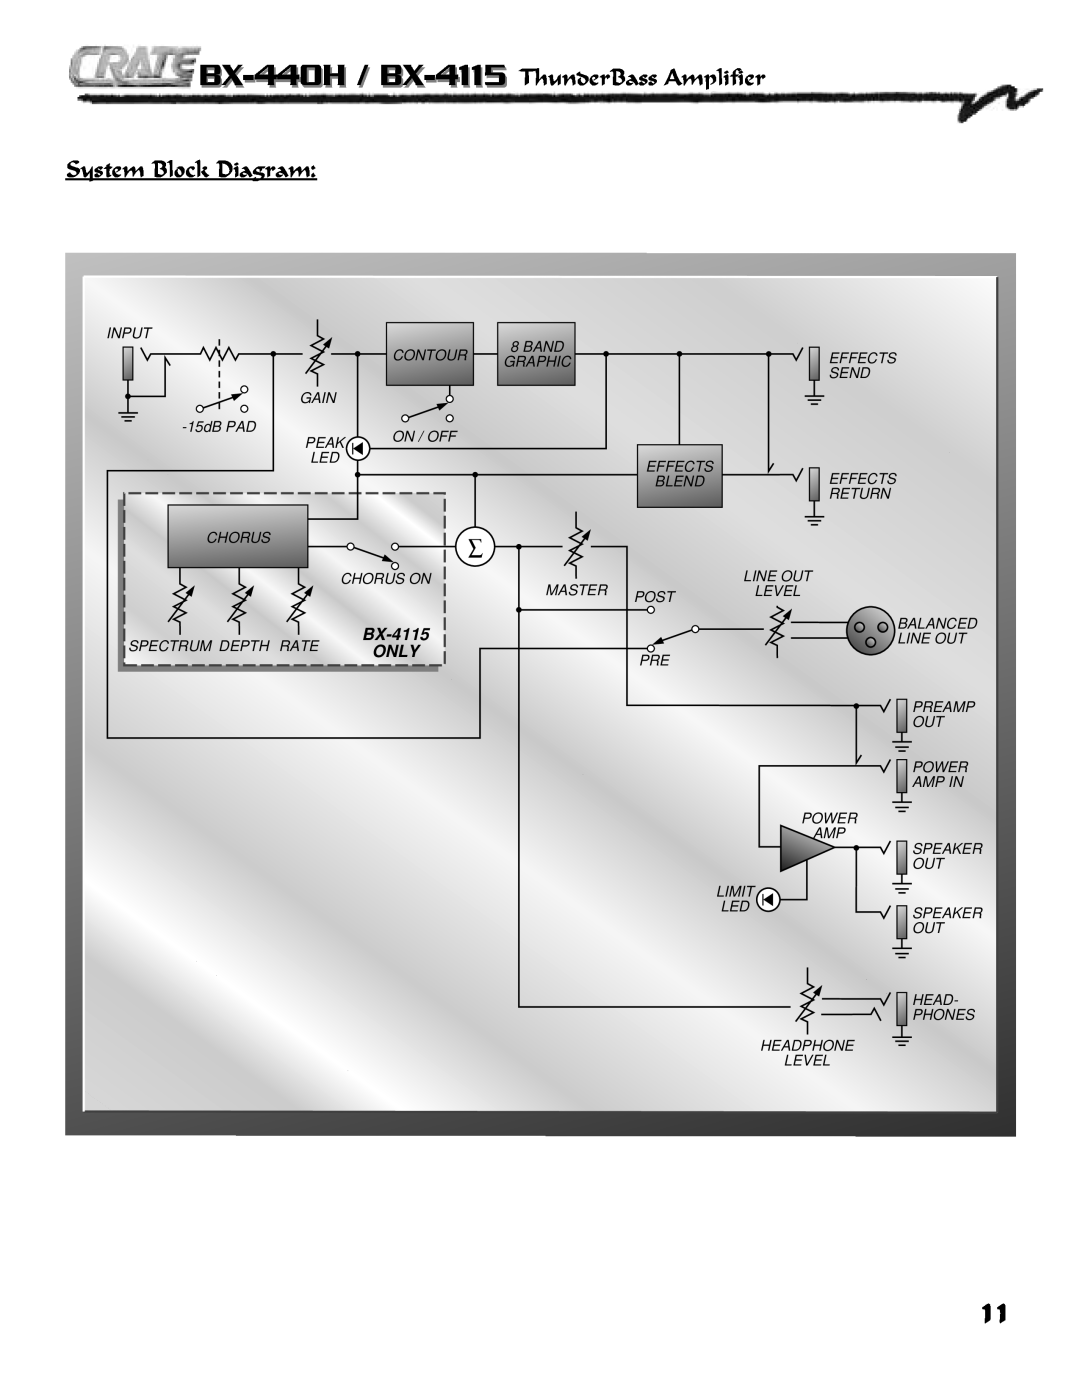 Crate Amplifiers owner manual BX-440H / BX-4115 ThunderBass Amplifier System Block Diagram, Only 